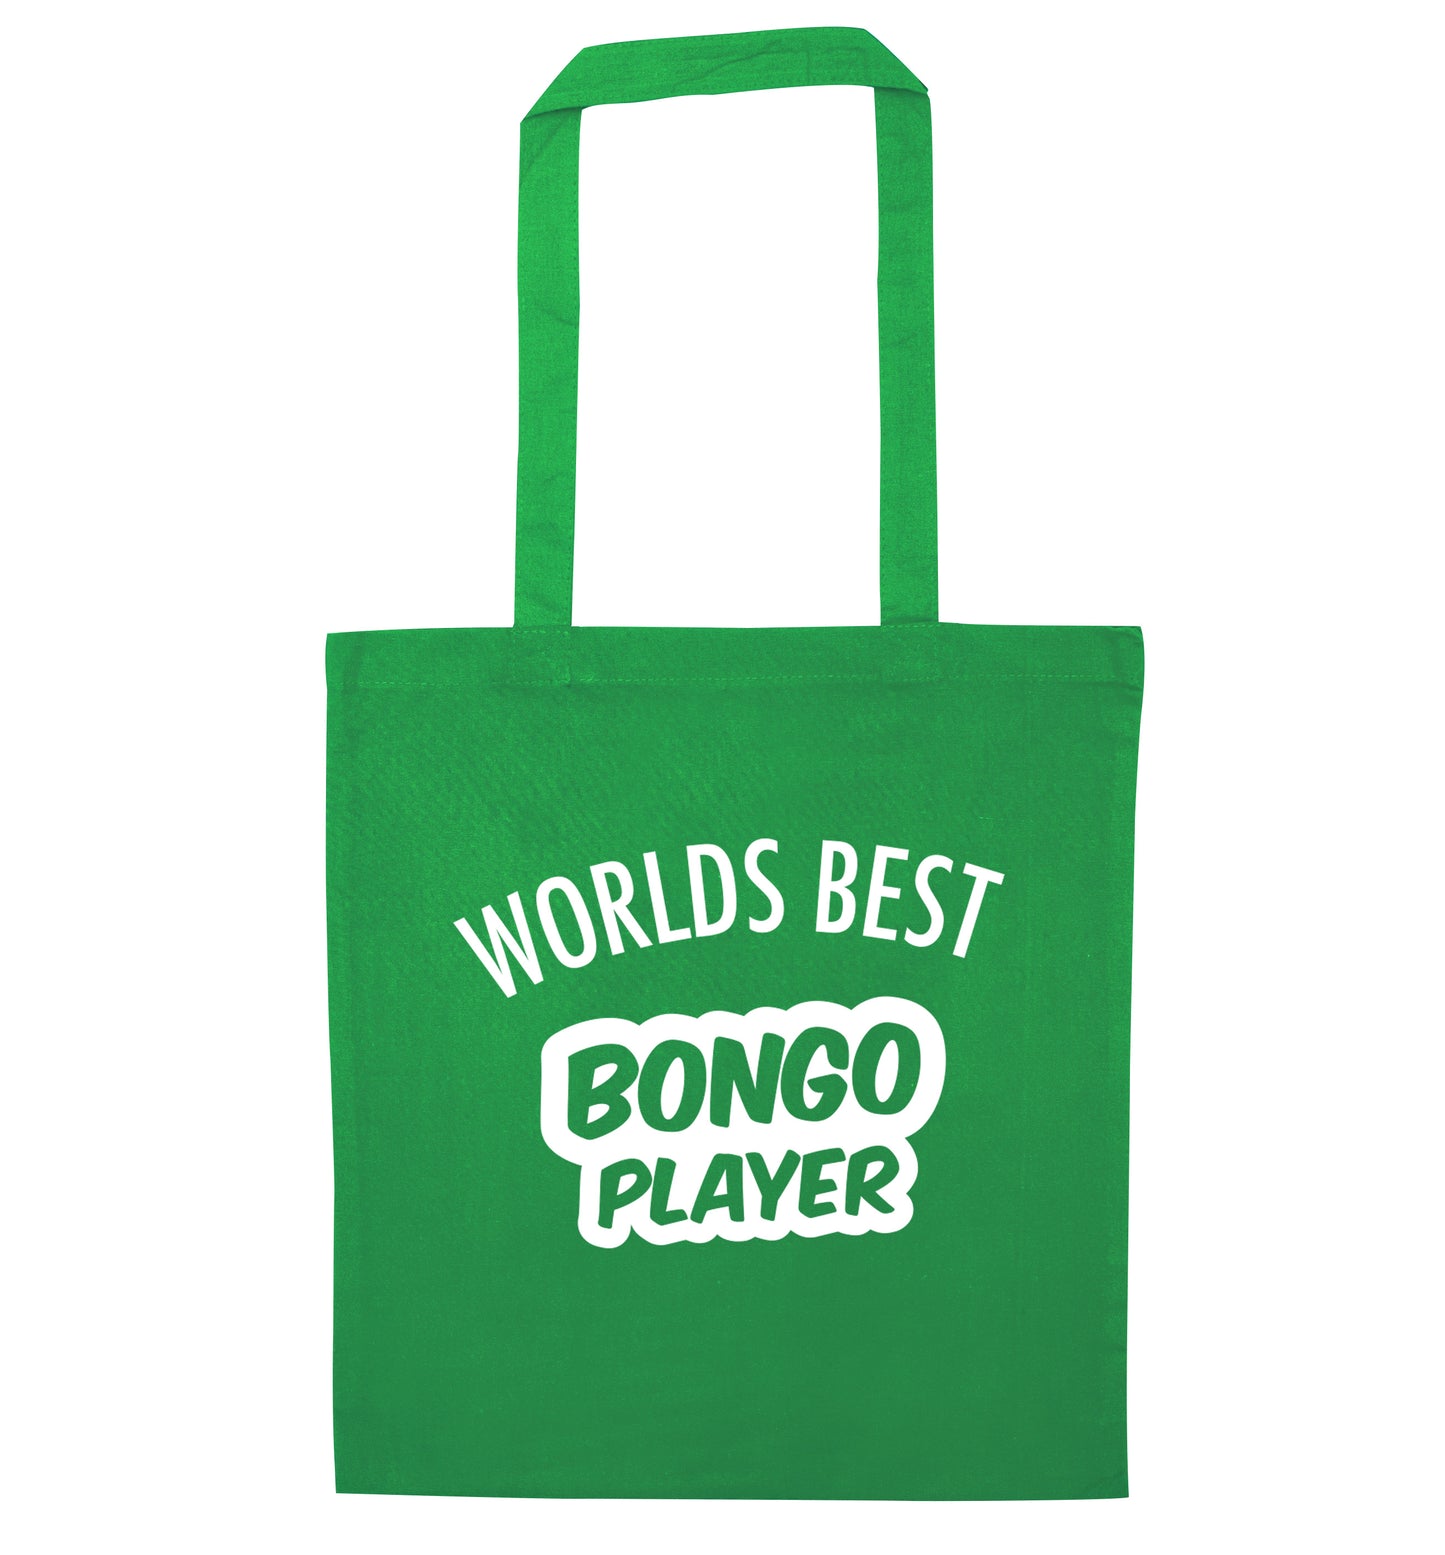 Worlds best bongo player green tote bag